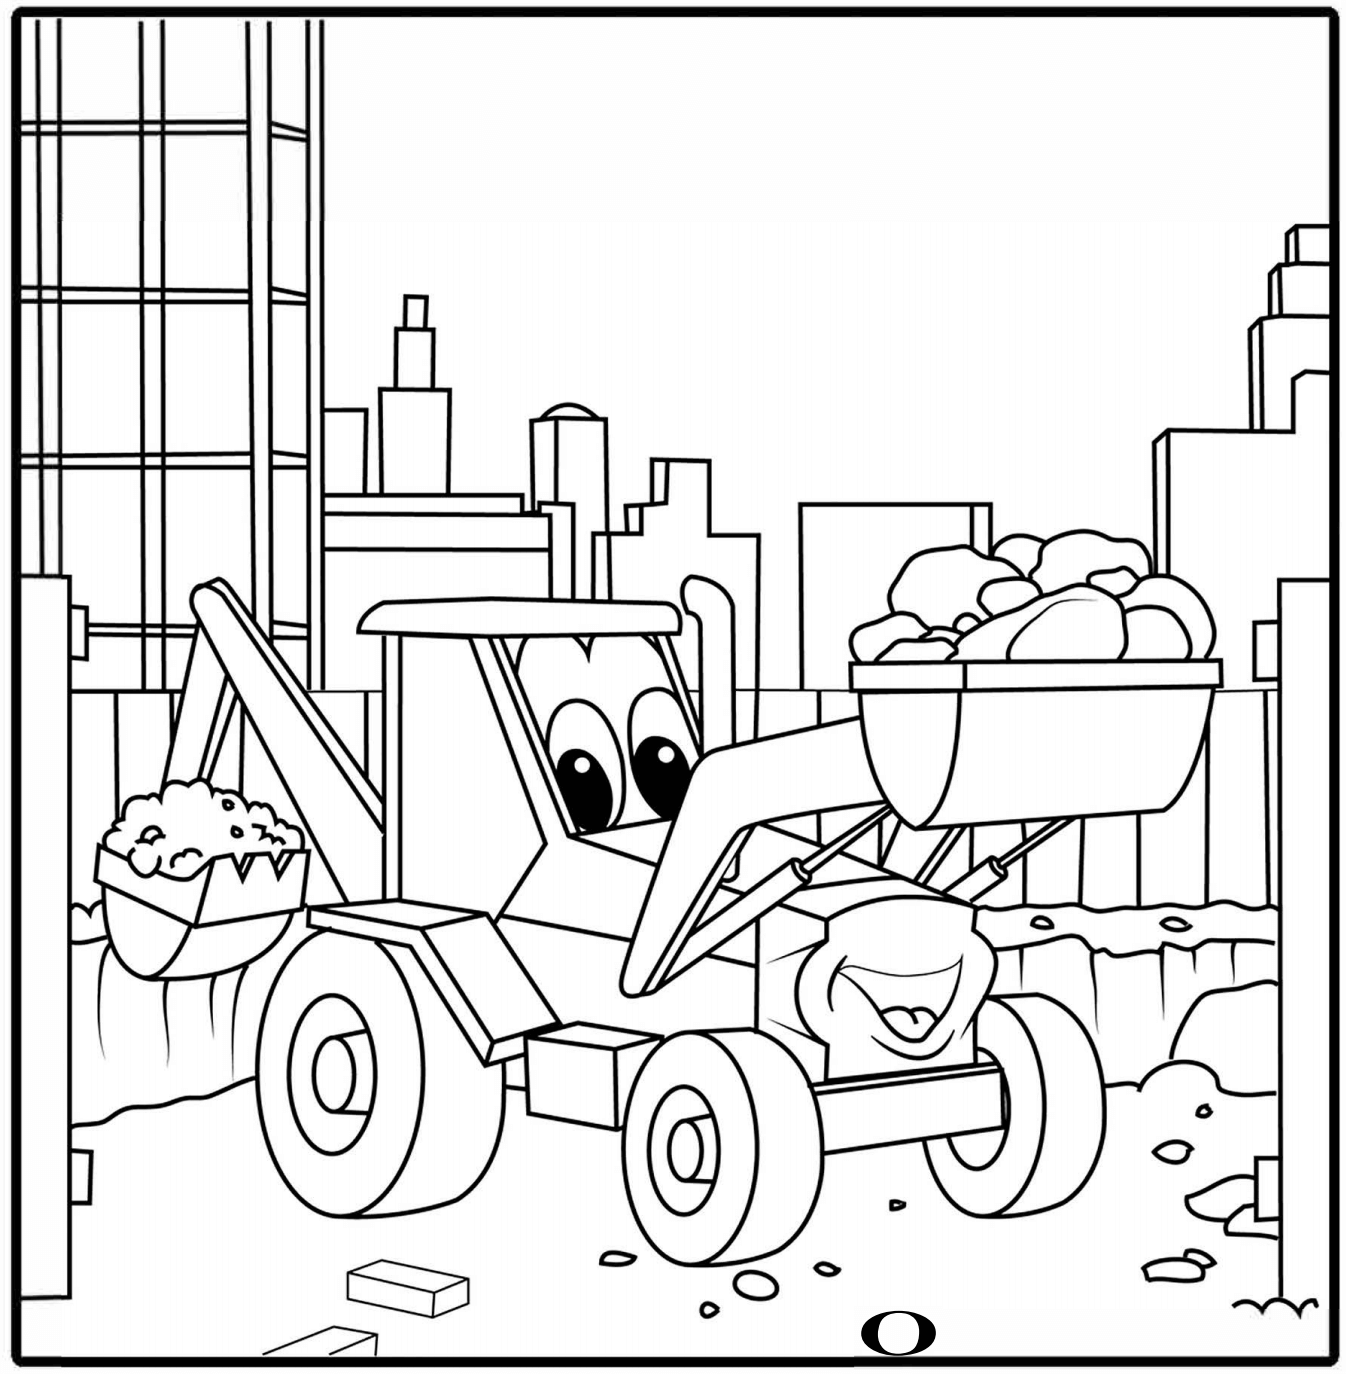 john deere tractor coloring pages free